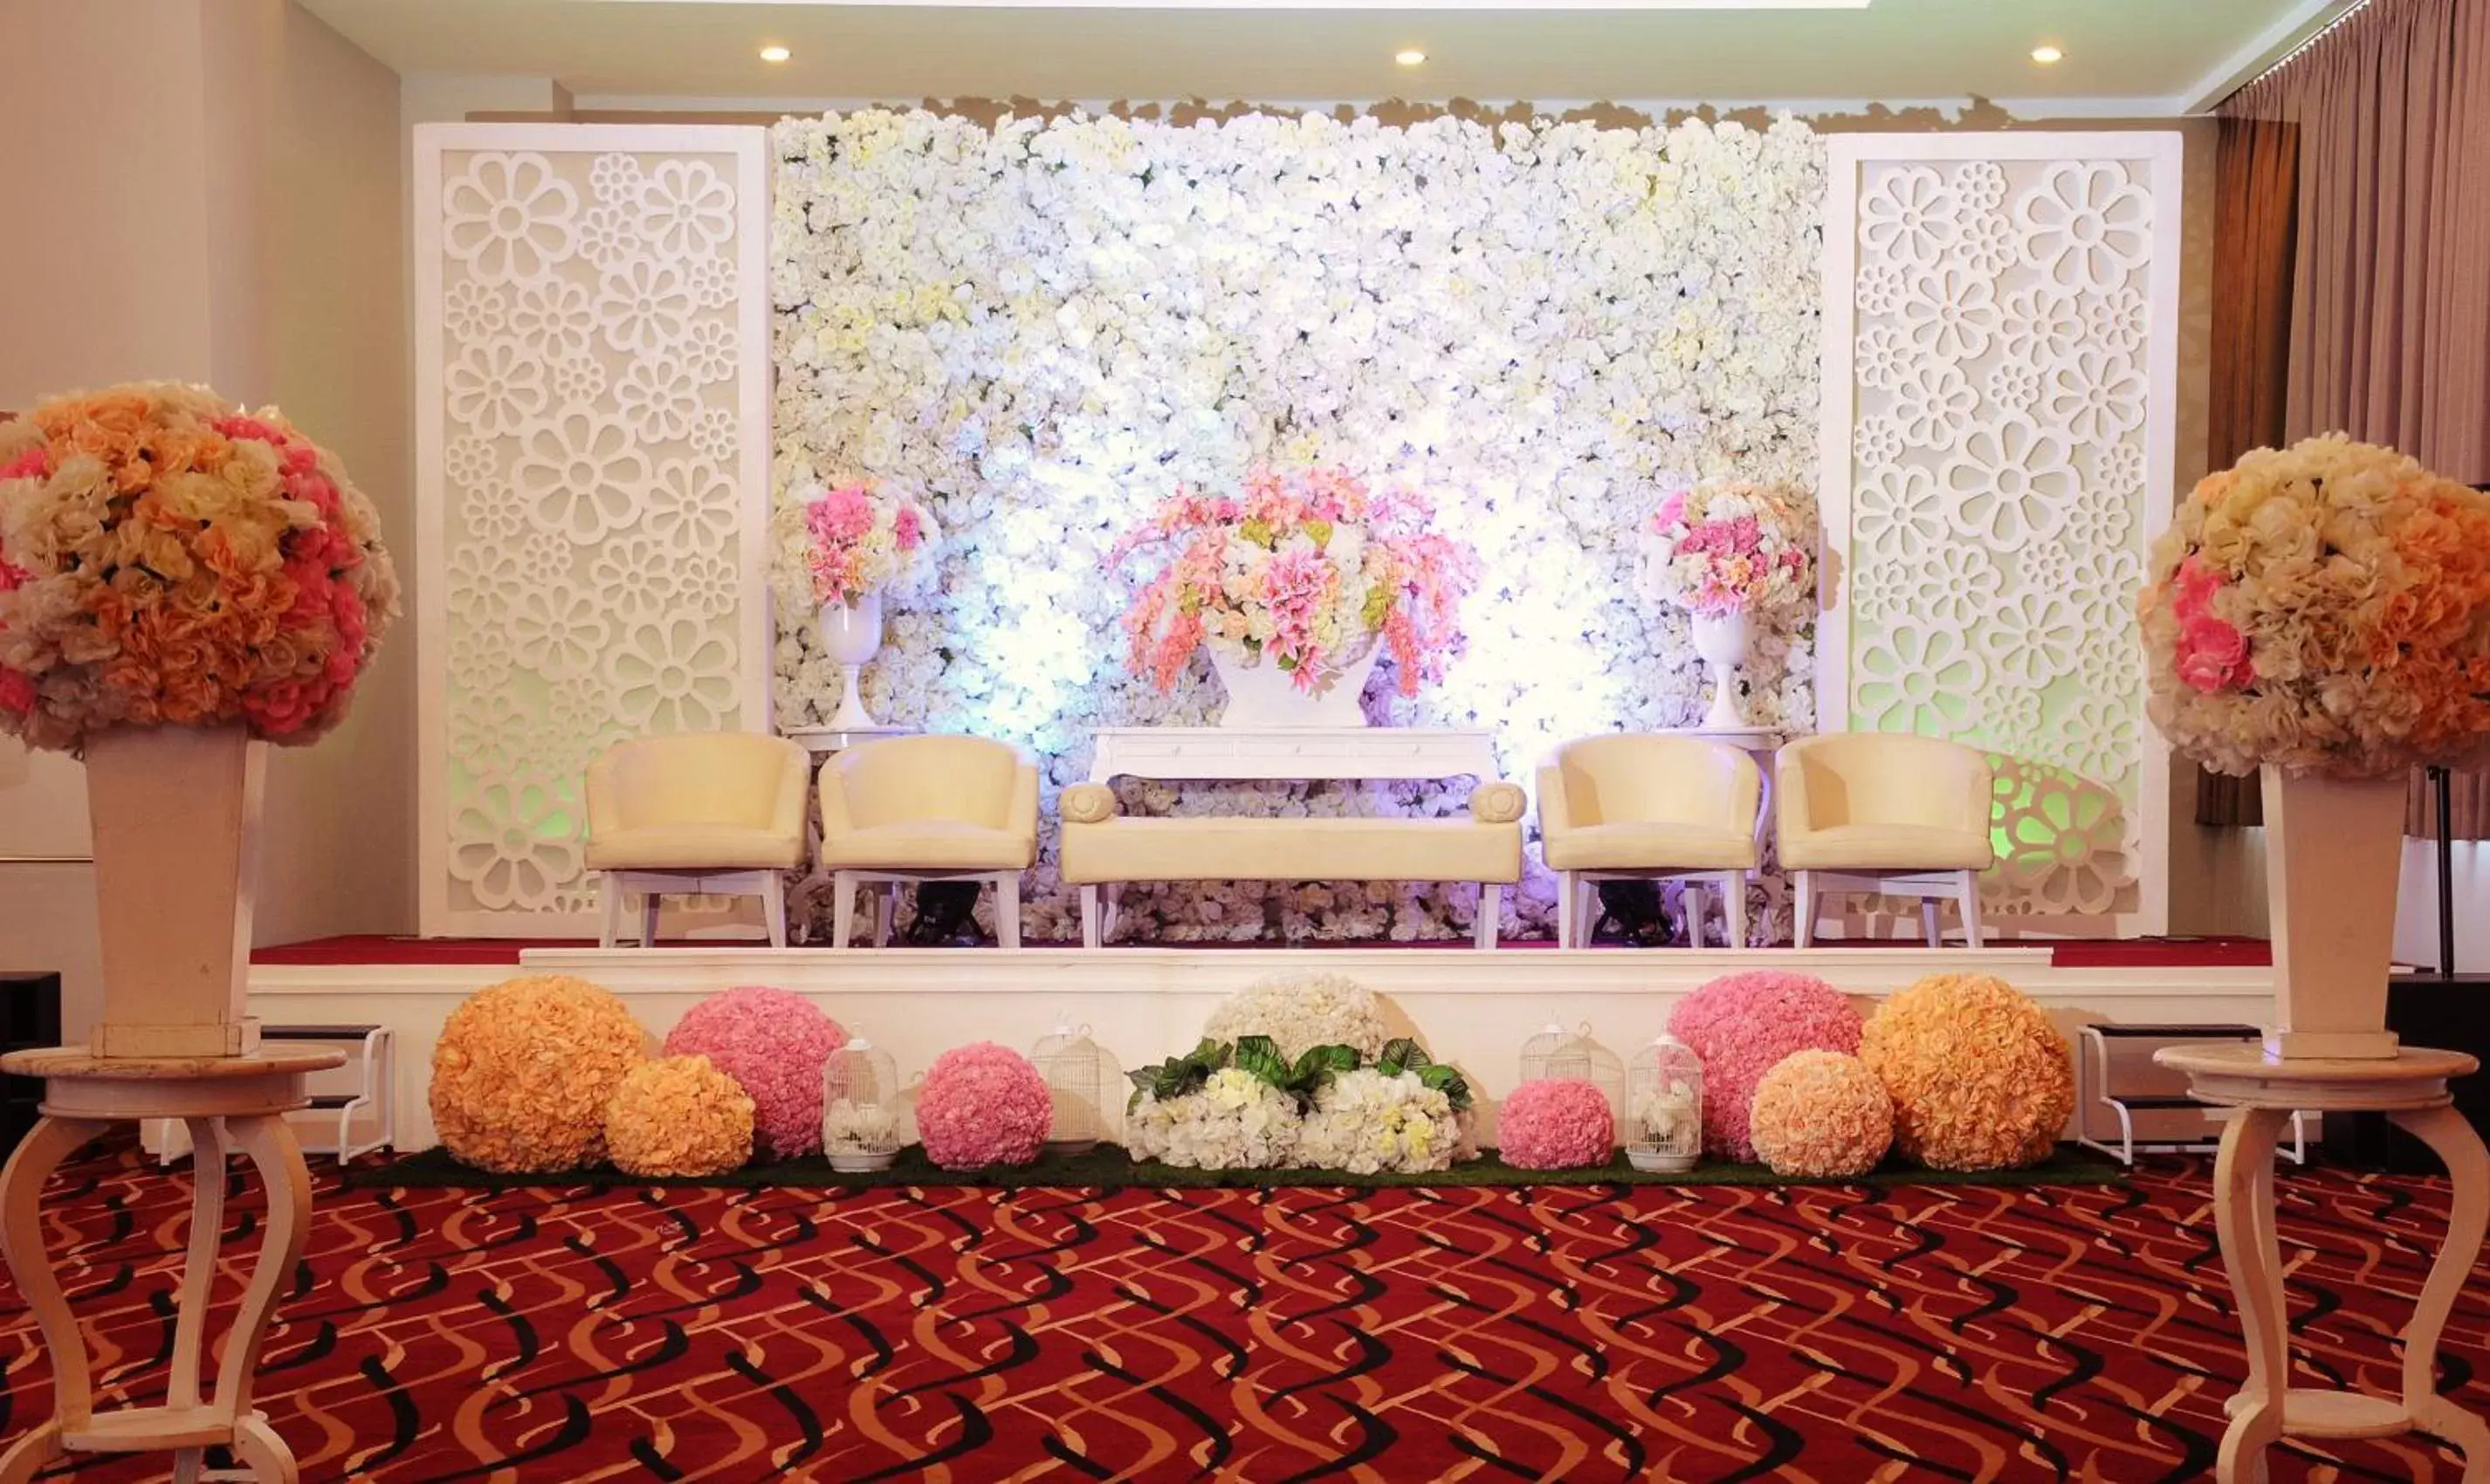 Banquet/Function facilities, Banquet Facilities in favehotel Hyper Square